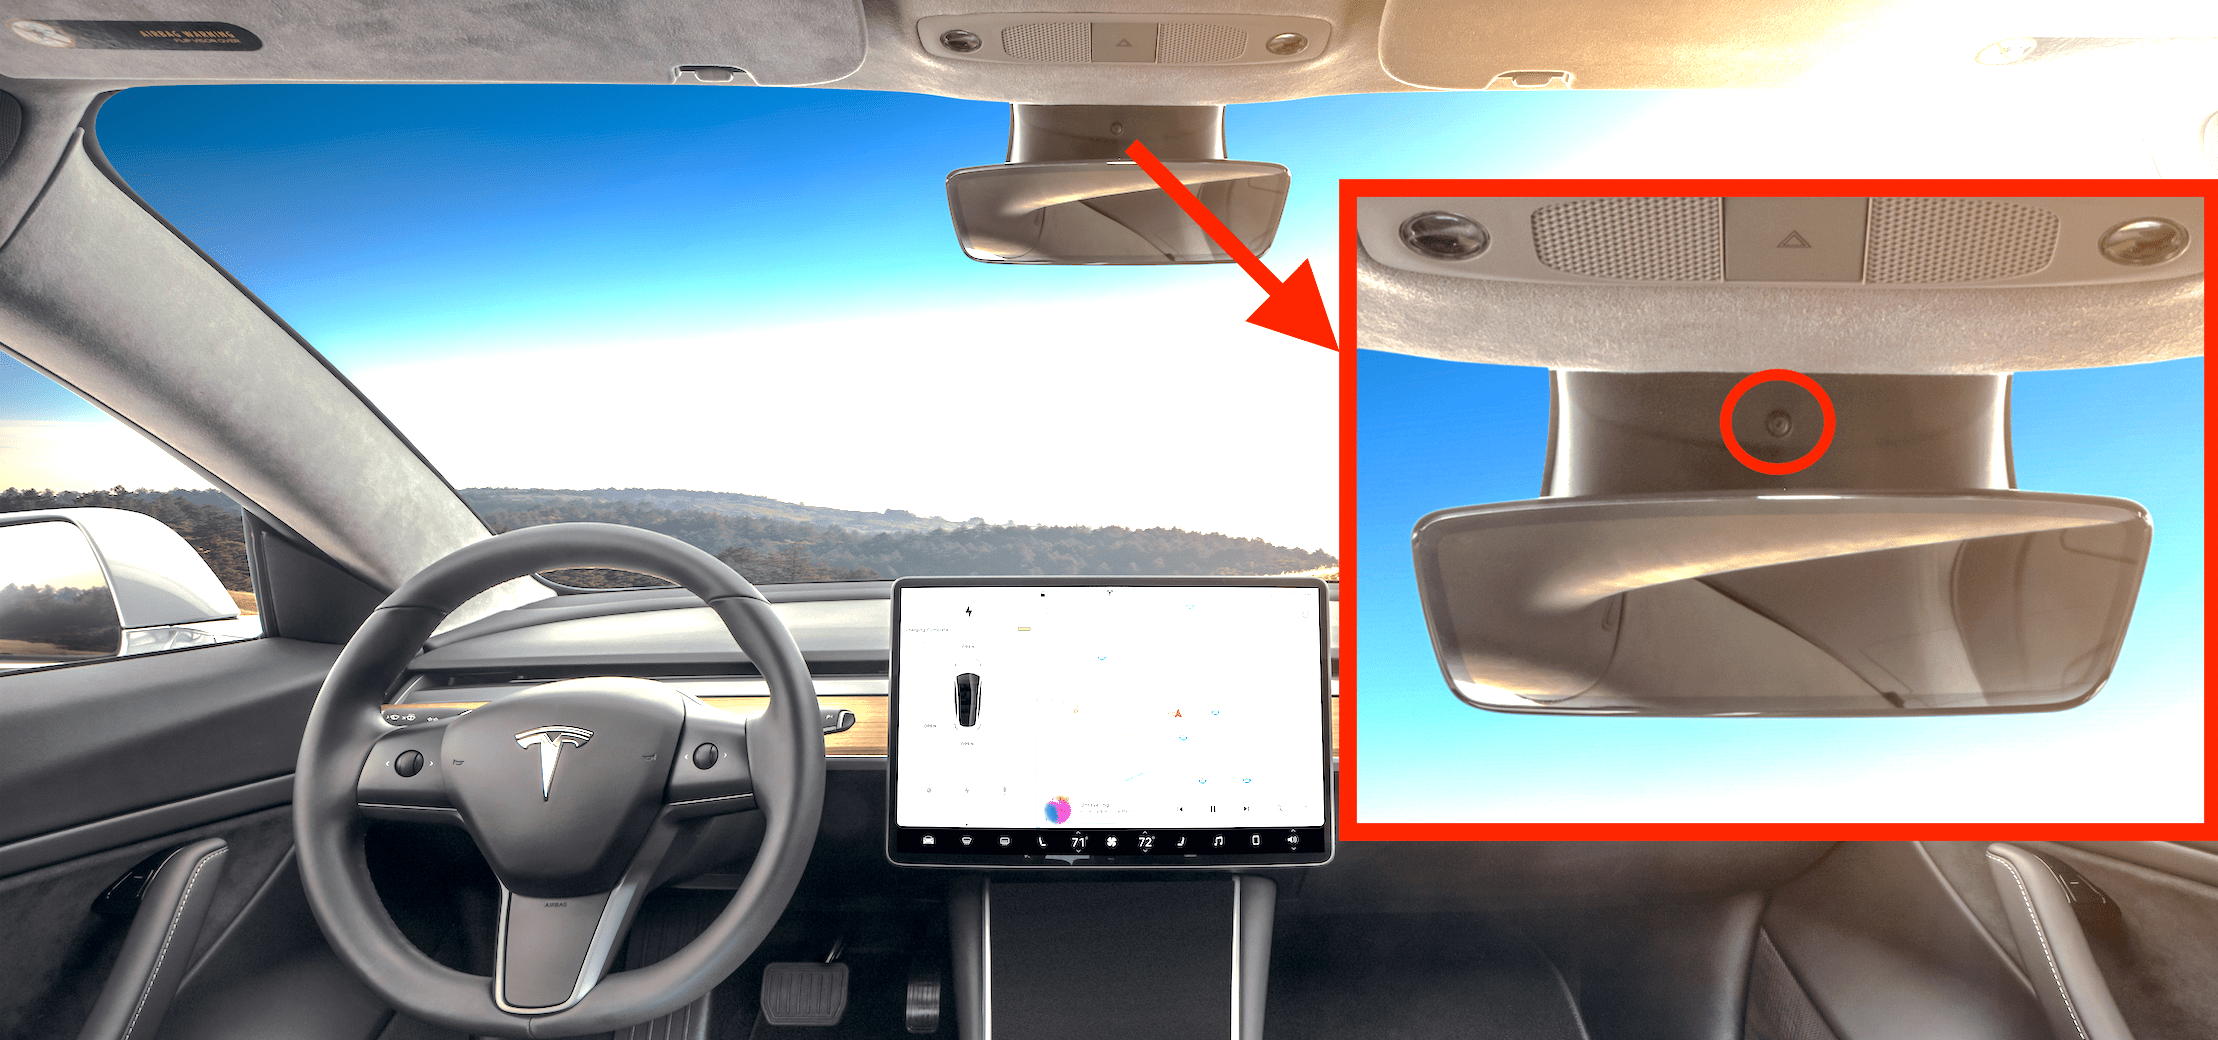 Musk wanted to use Tesla cameras to spy on drivers and win